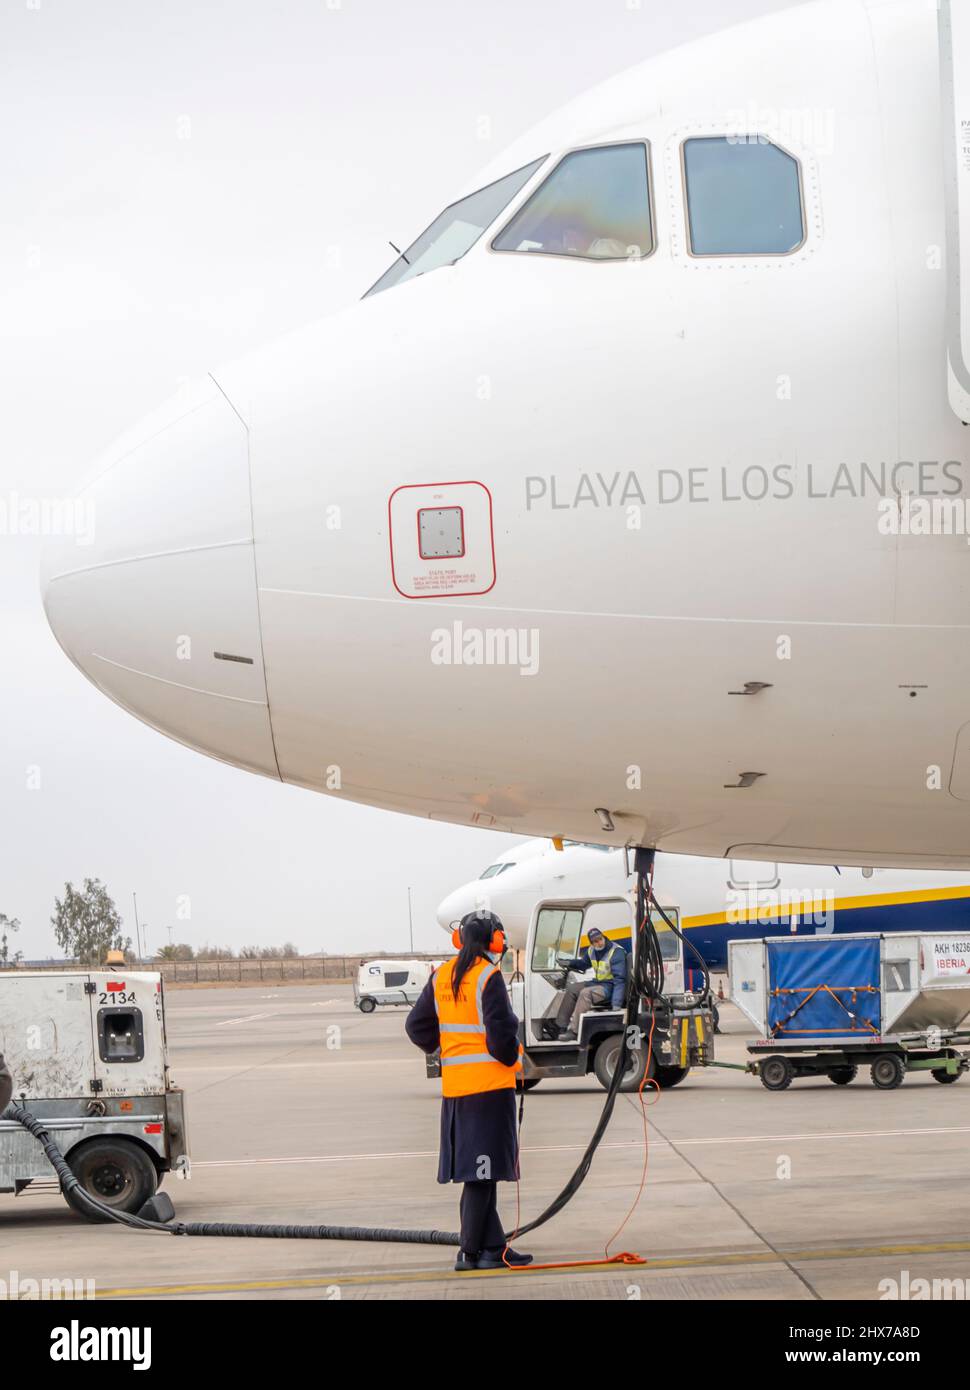 A female worker employee refueling Iberia airlines Airbus A320 twin-engine jet aircraft airplane in Marrakesh Menara Airport, Morocco, North Africa Stock Photo